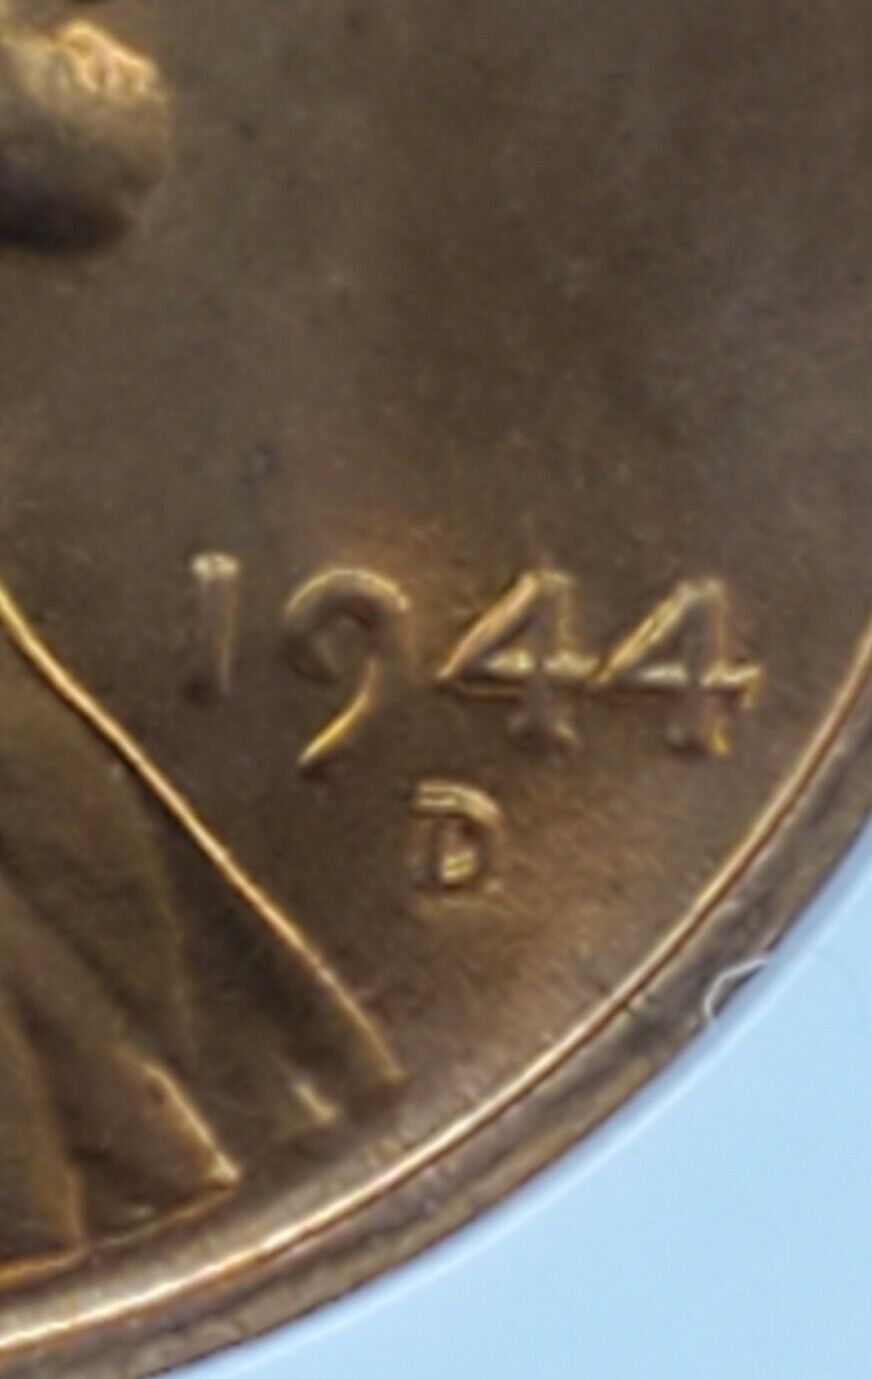 1944 D/D Lincoln Wheat WW2 Shell Casing Variety RPM 002 FS-502 FS-021.1 MS66 Red